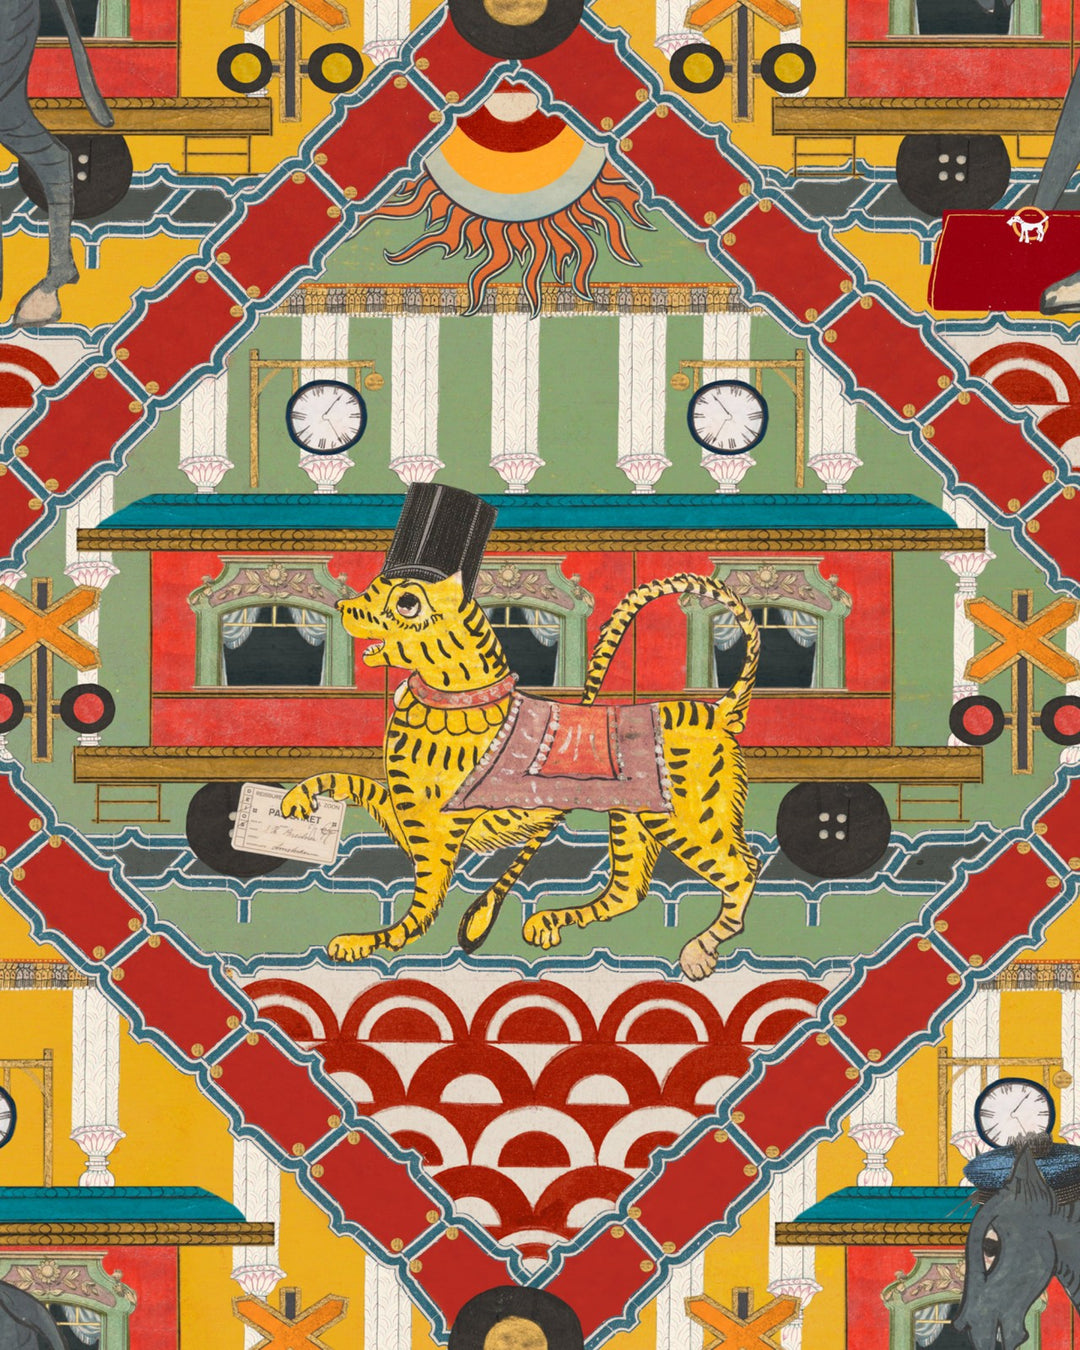 Mind-the-gap-wallpaper-Orient-express-collection-gare-du-nord-lemon-wallpaper-neoclassical-patterns-ornate-carnival-style-pattern-details-animals-architectural-elements-Lemon-WP20773